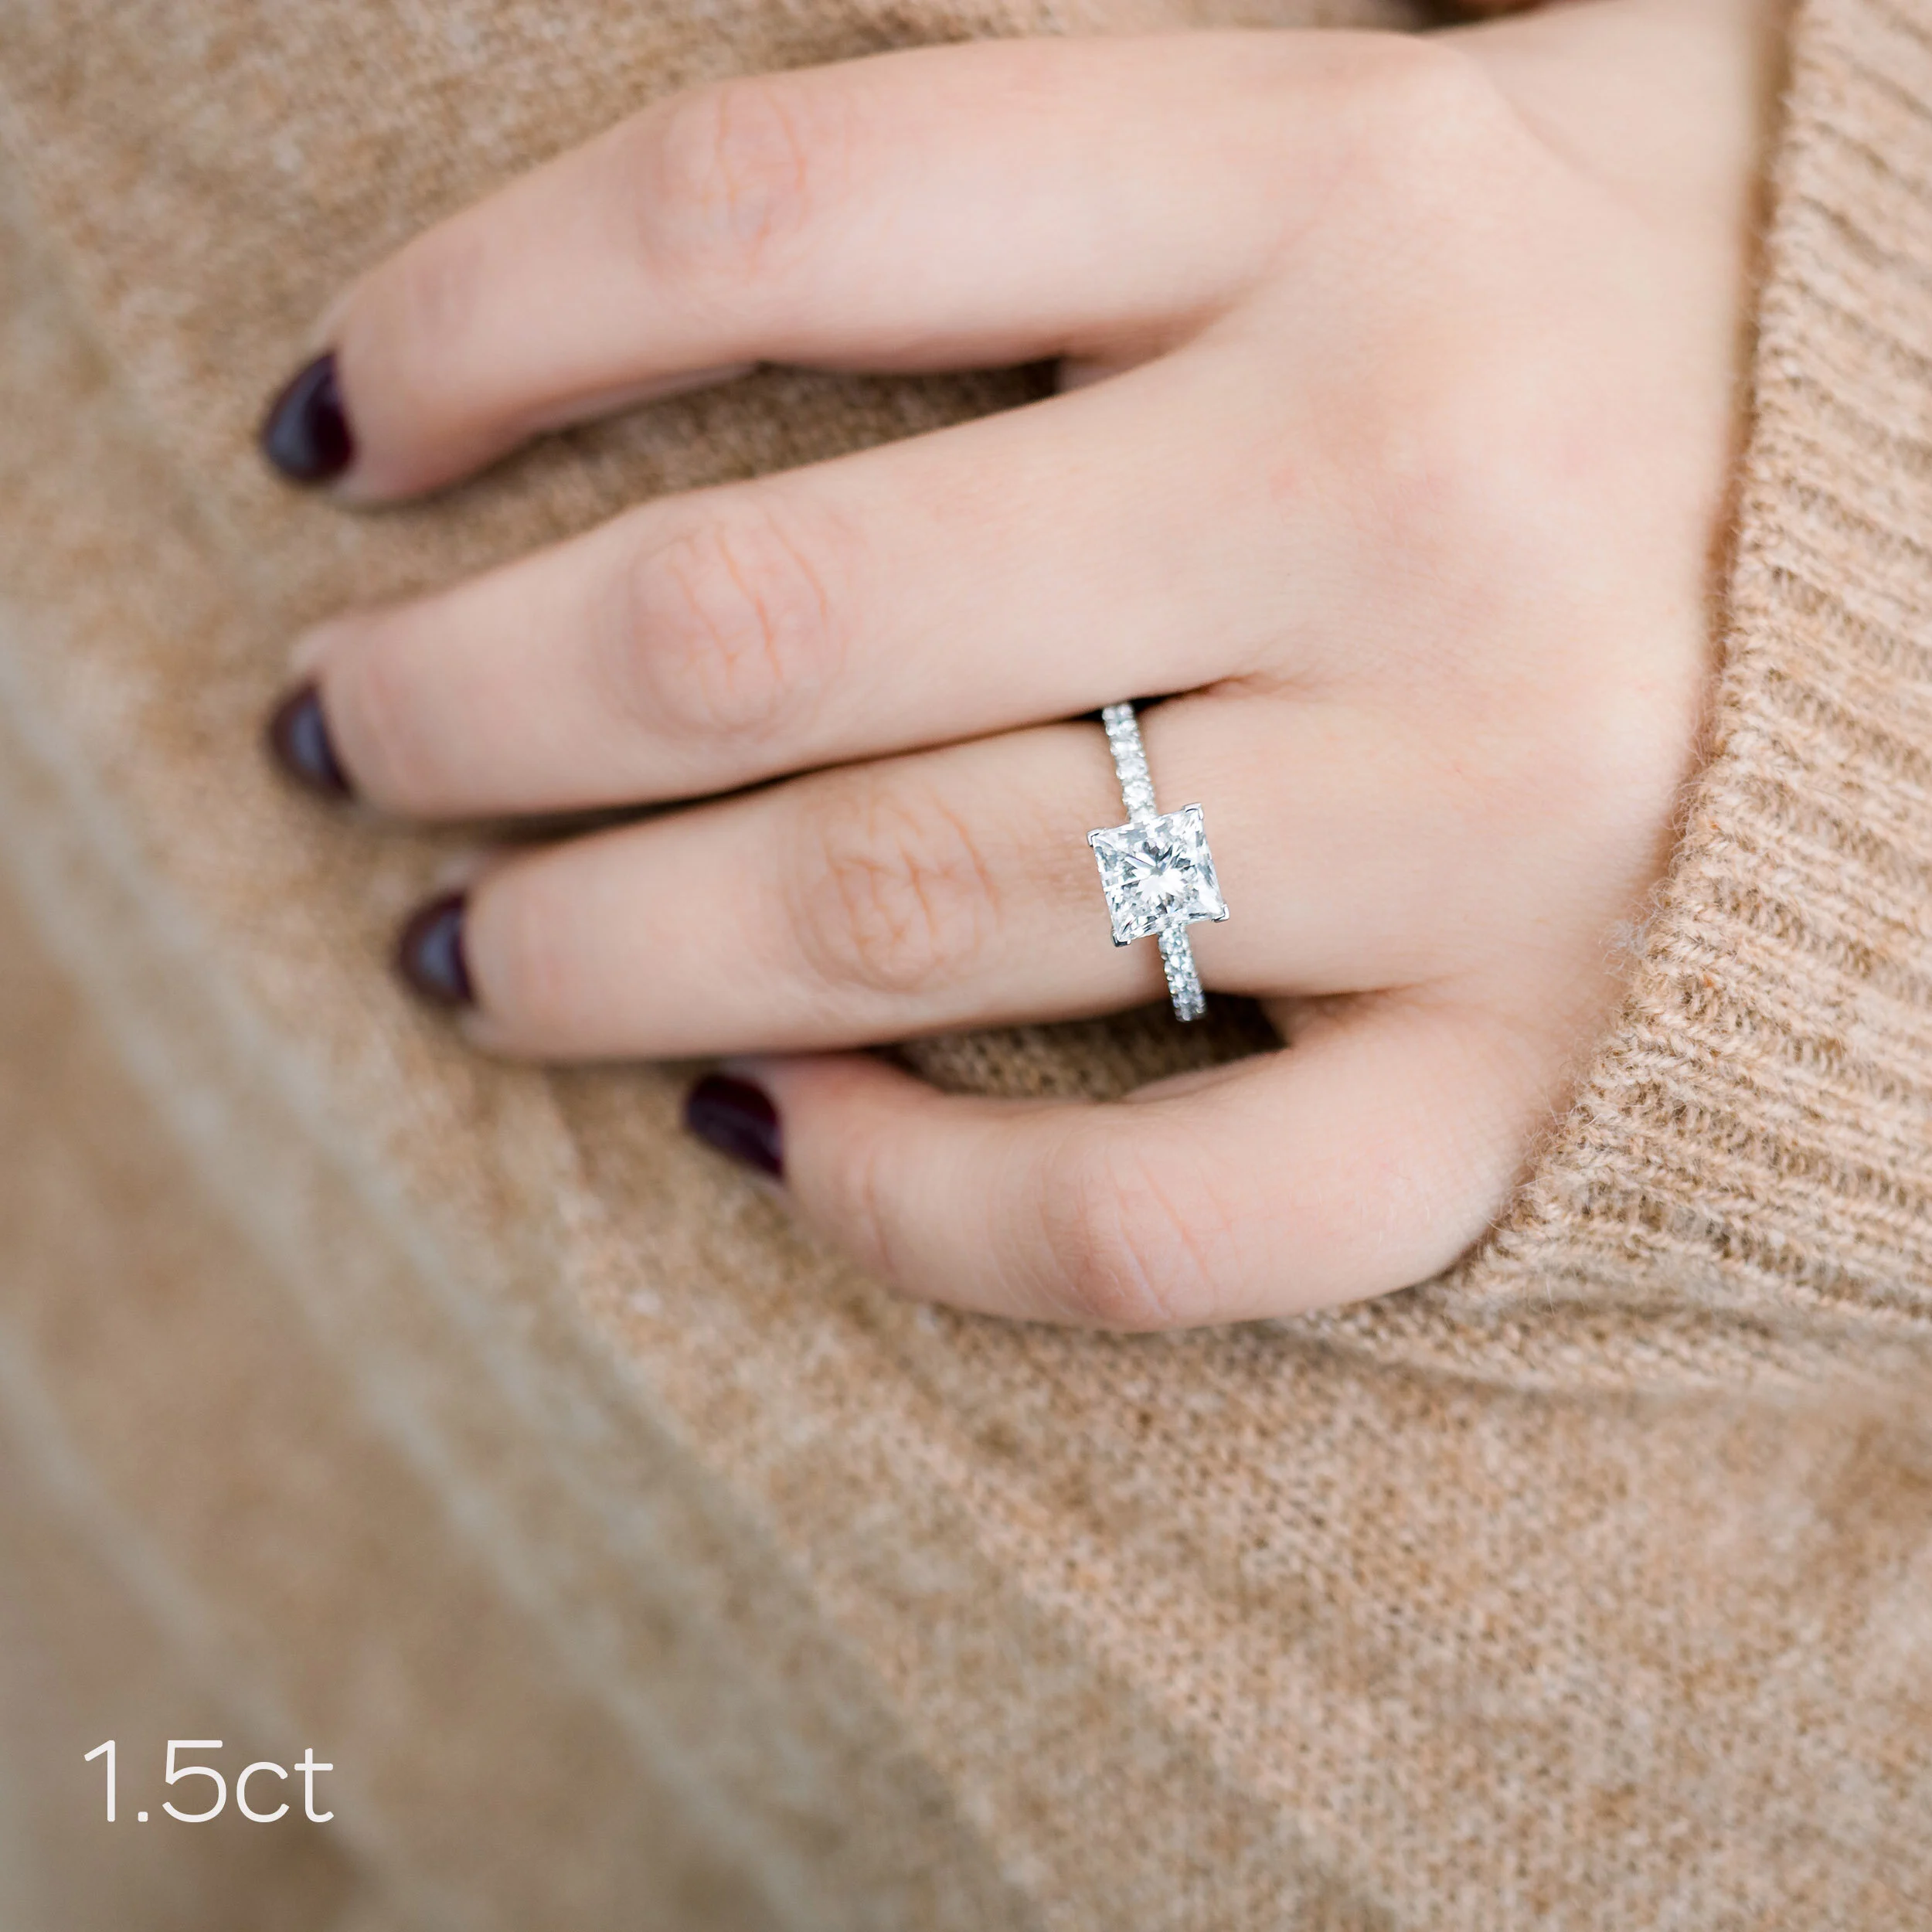 1.50ct princess cut in pave setting